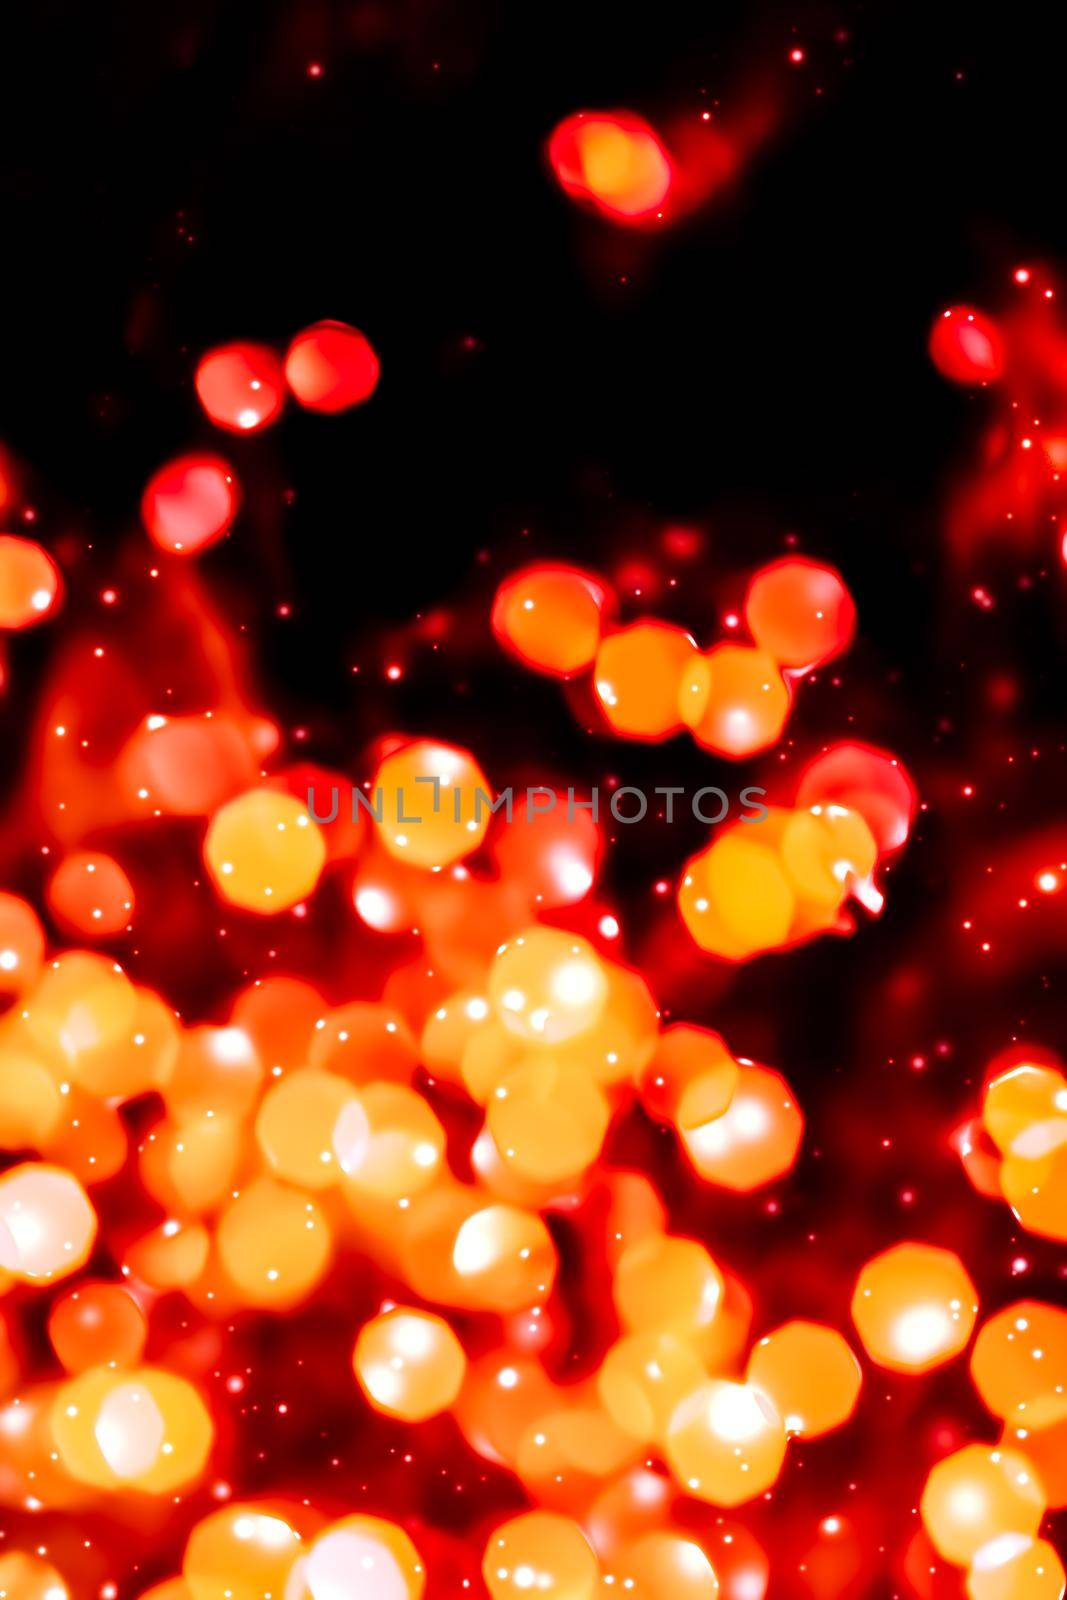 Autumn colours, red fall backdrop and artistic texture concept - Halloween abstract holiday background